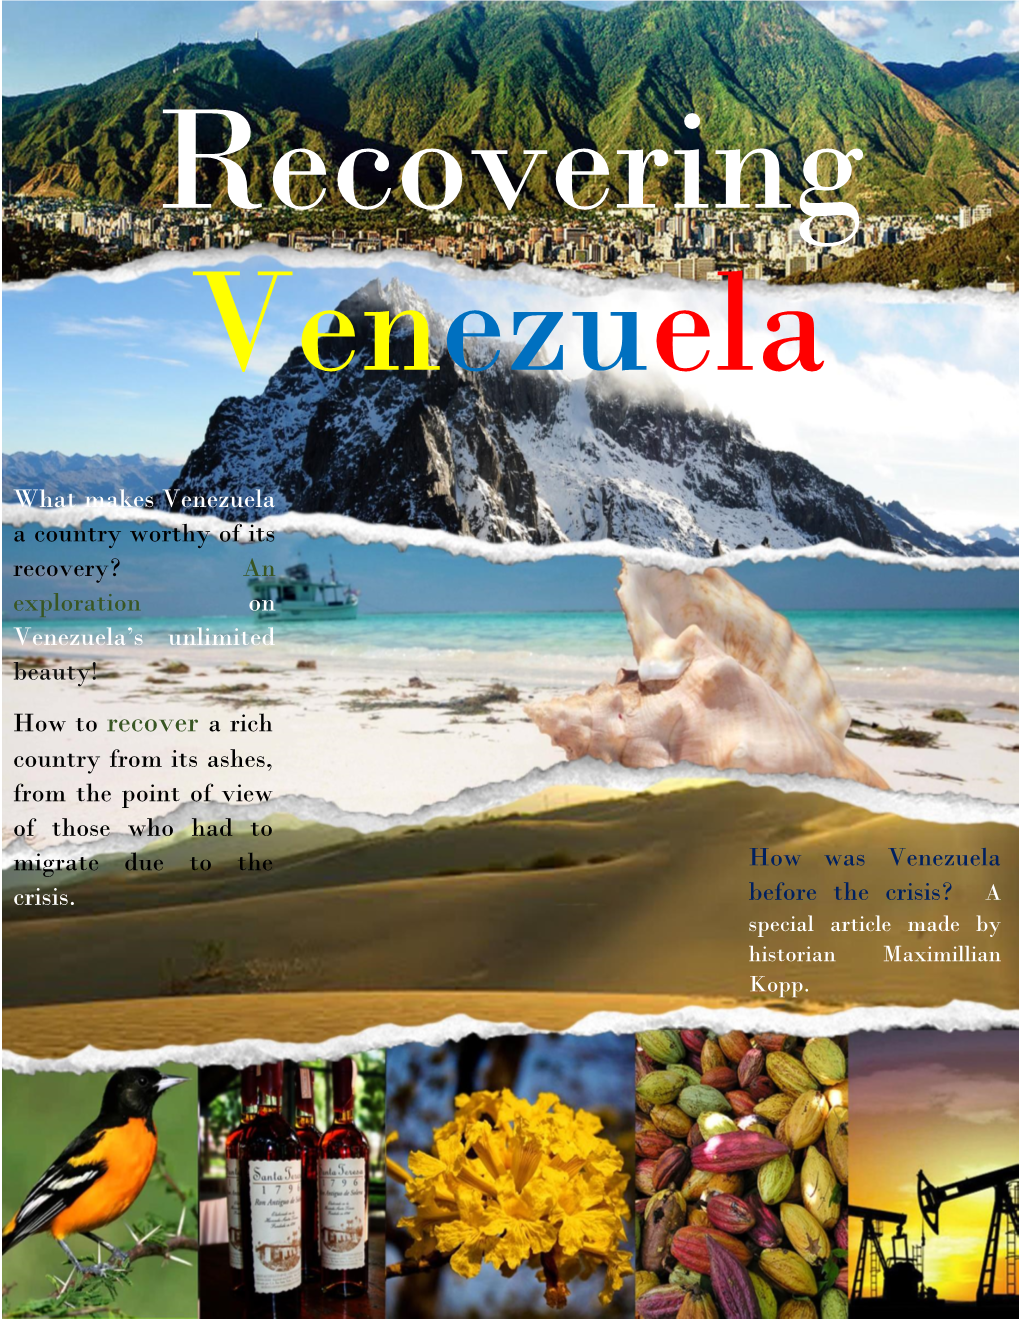 How to Recover a Rich Country from Its Ashes, from the Point of View of Those Who Had to Migrate Due to the How Was Venezuela Crisis